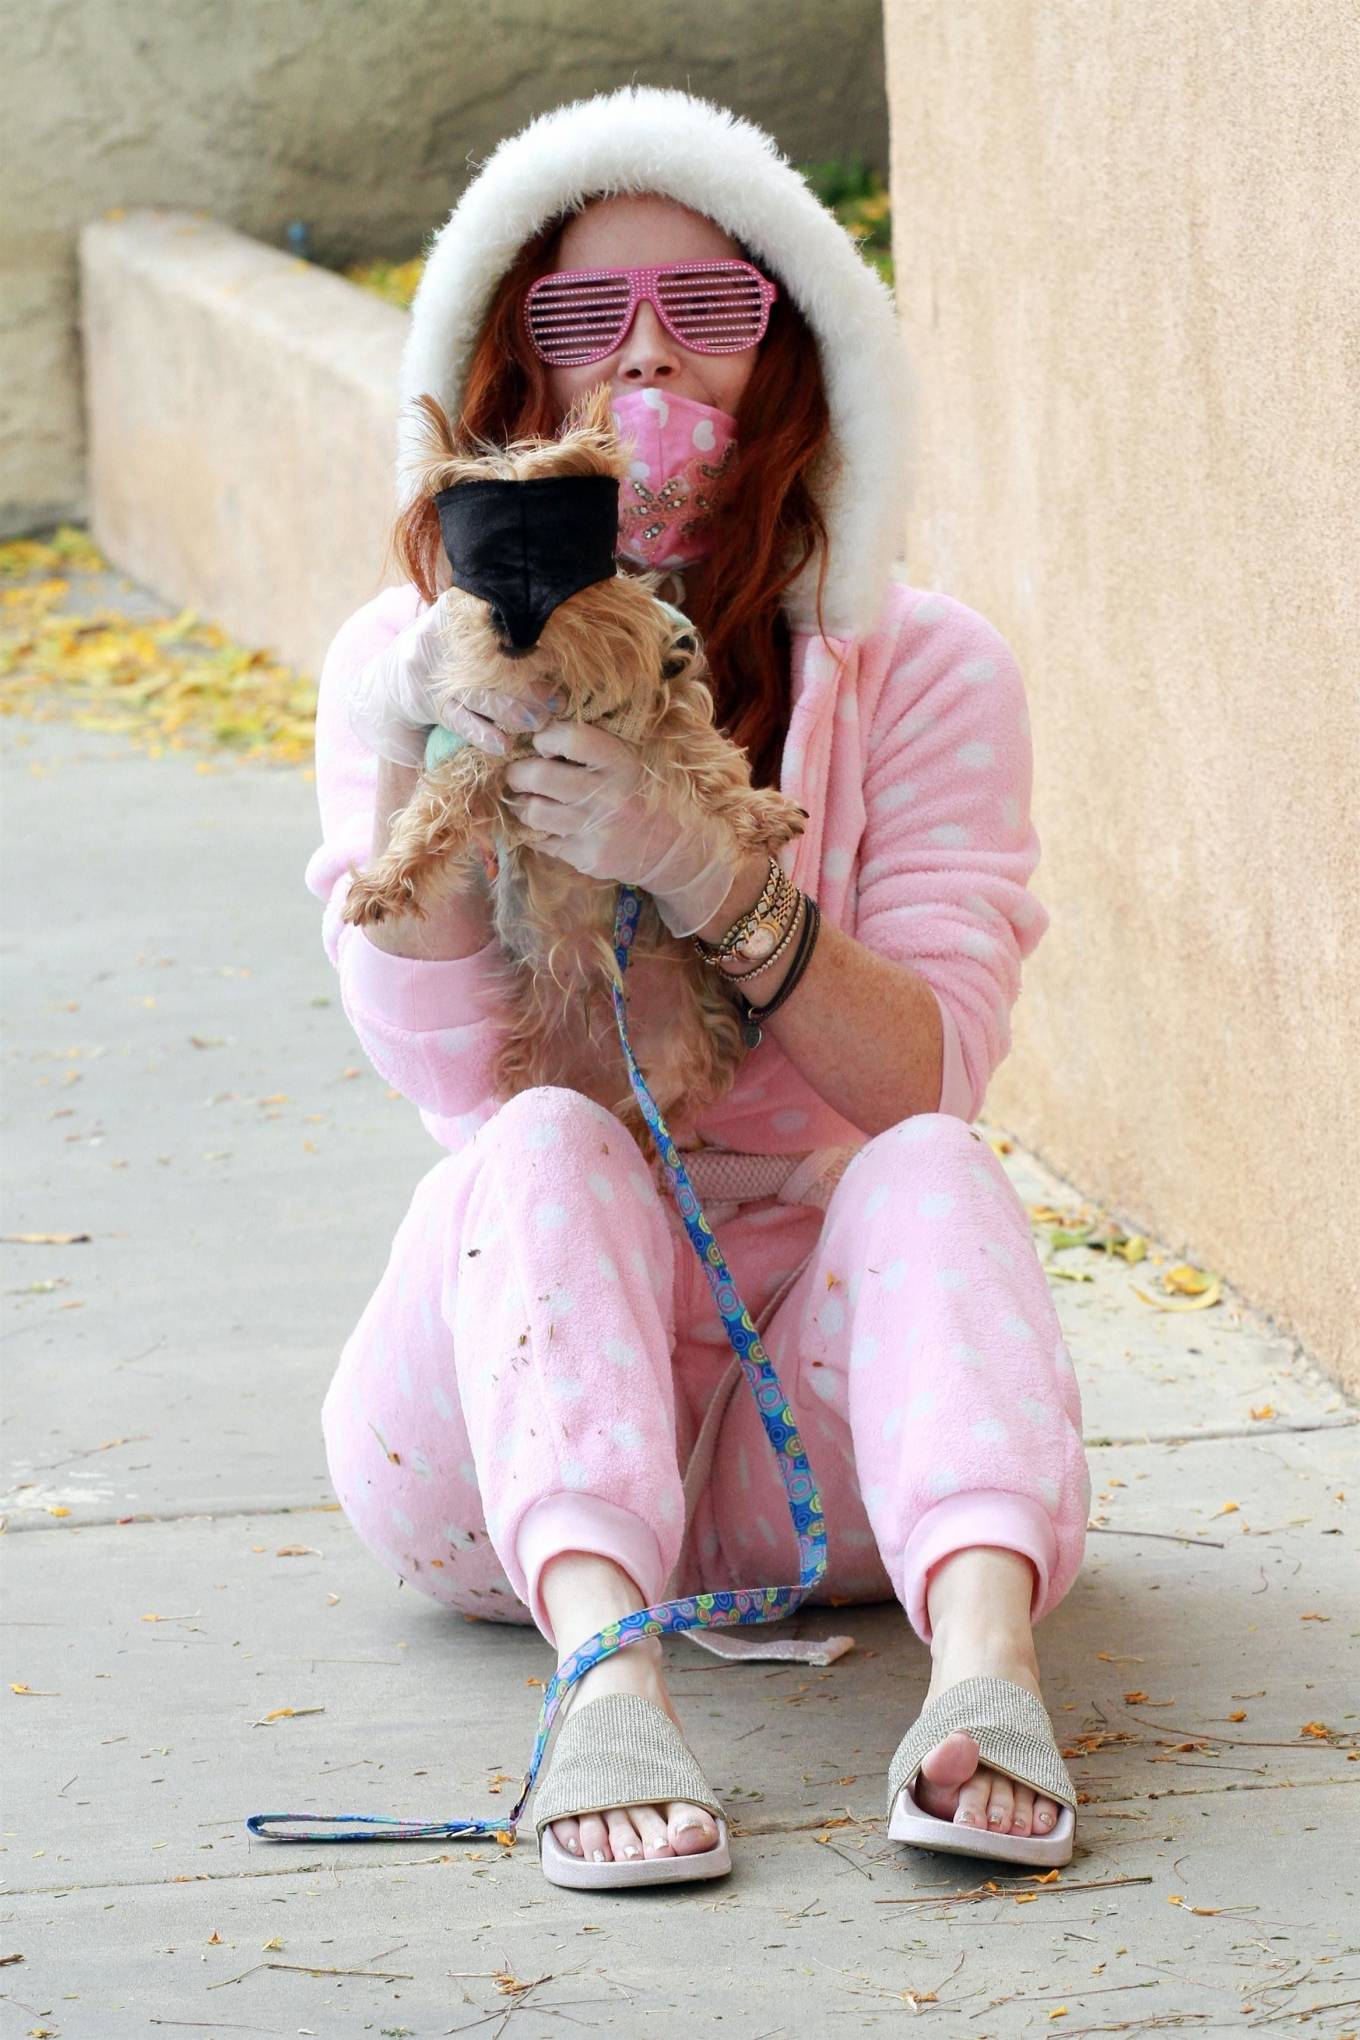 Phoebe Price â€“ Wearing Her Pajamas While Out For Dog Walk And Paparazzi Attention